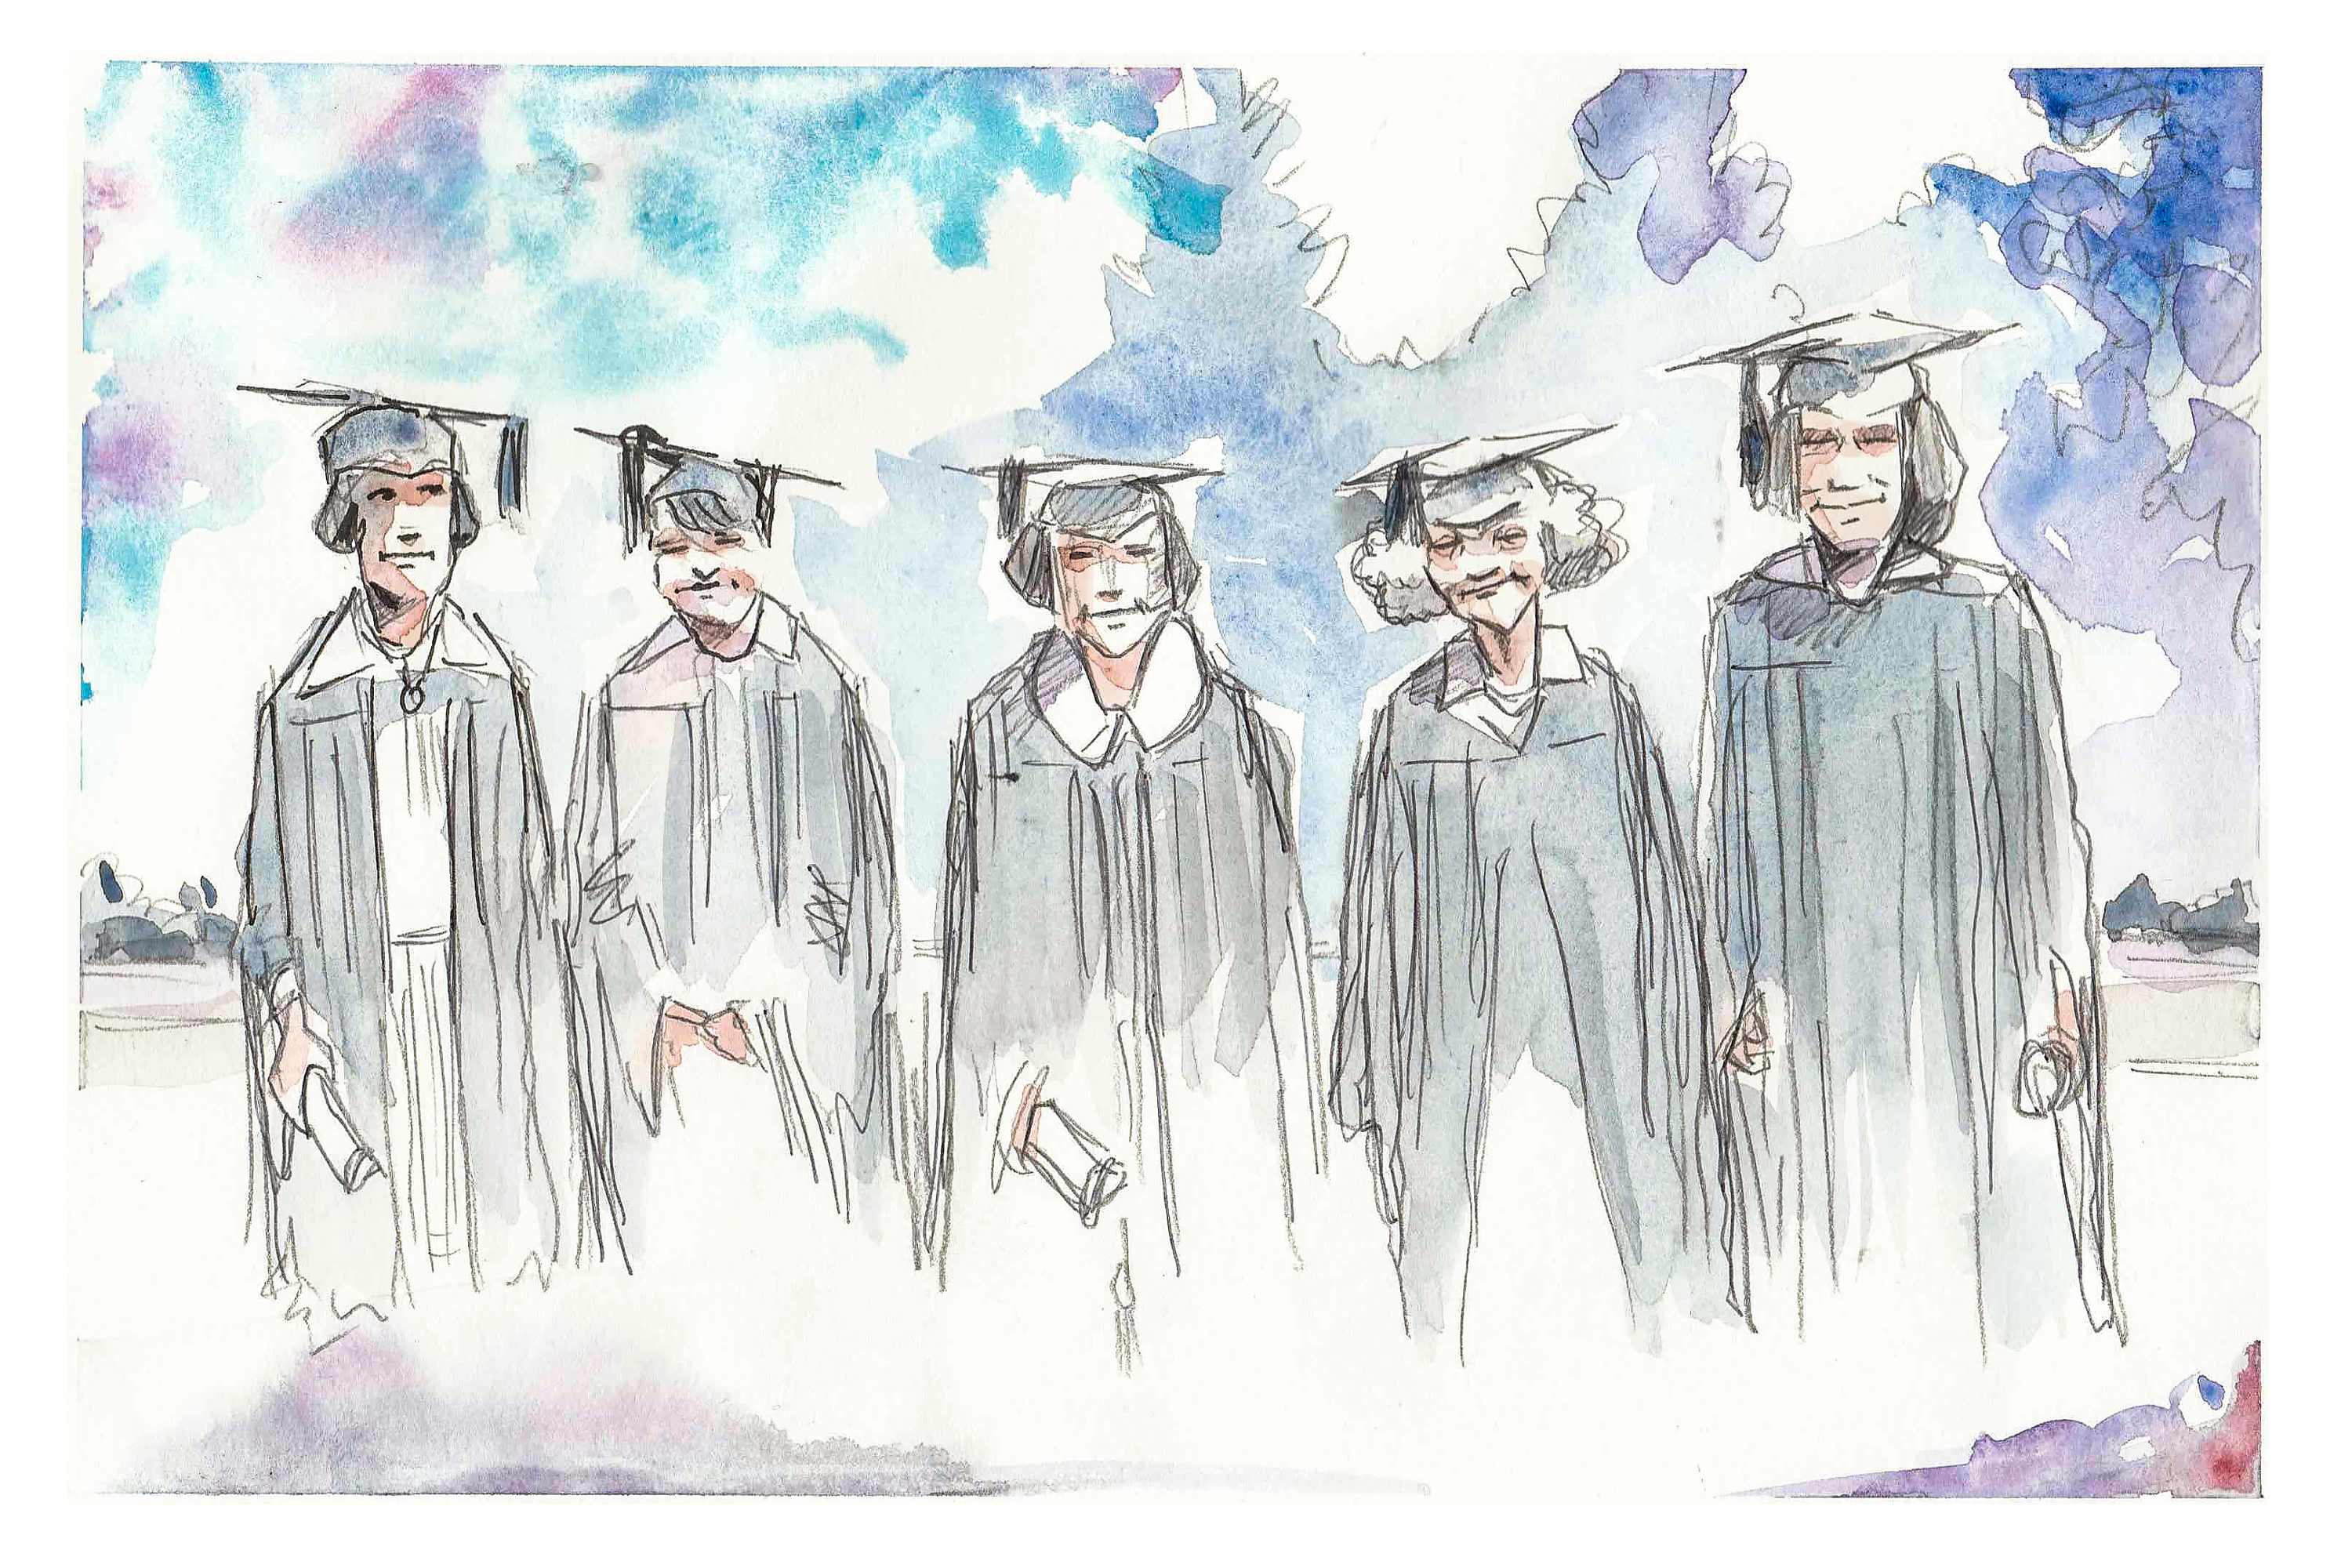 Dooble by Steven White of the First Five Women Graduates at Virginia Tech.